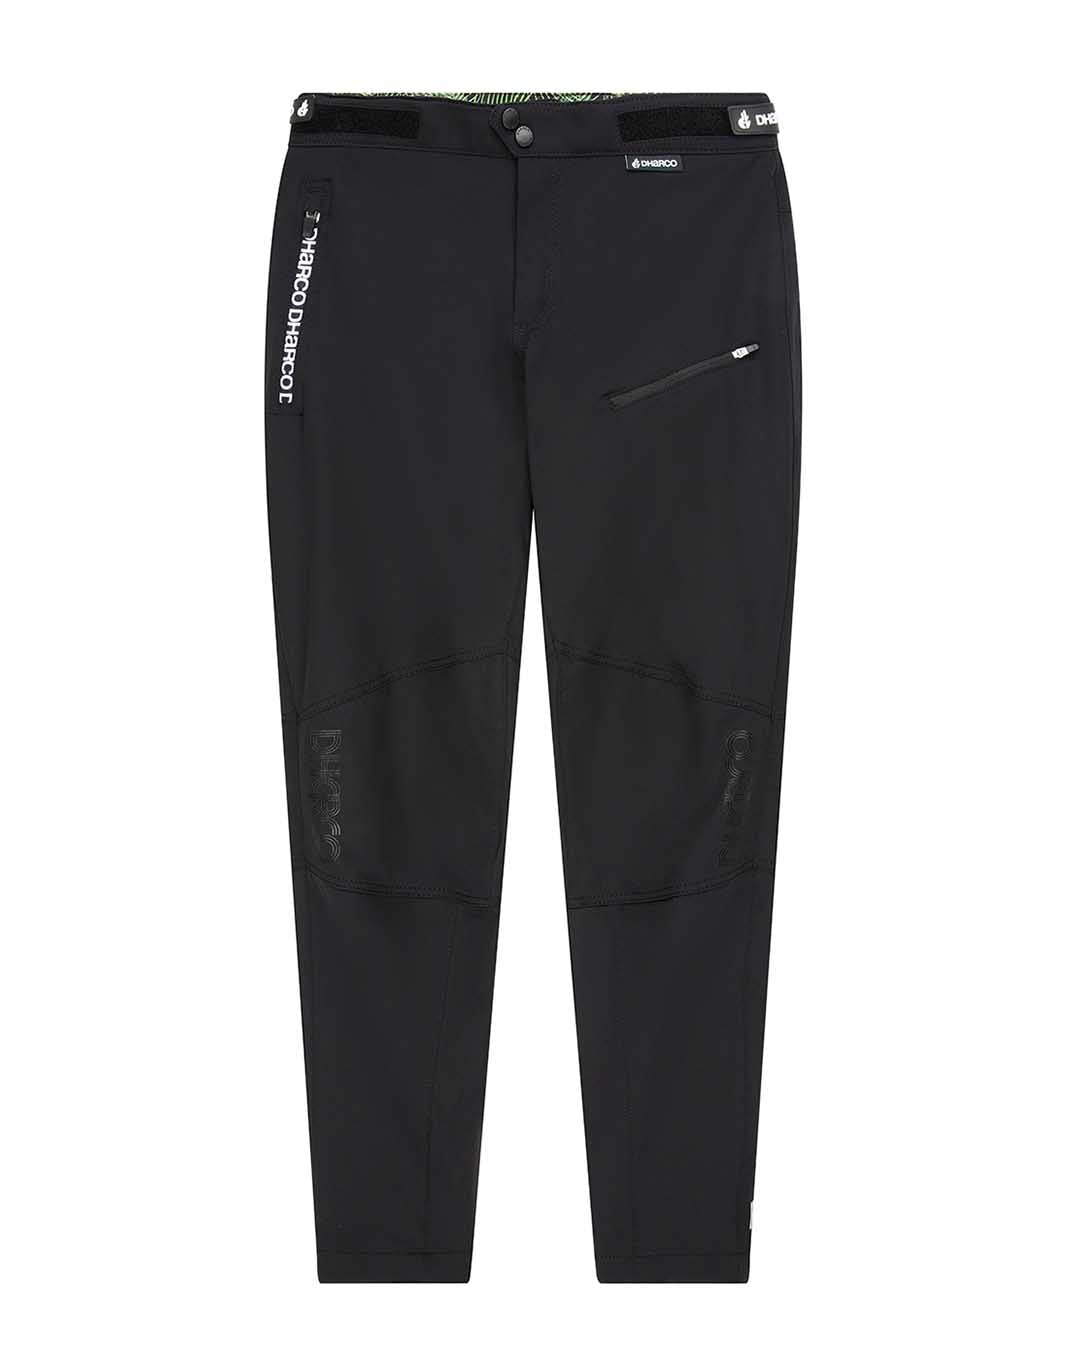 Out-of-Pocket Women's Joggers – Non-Equity Partner